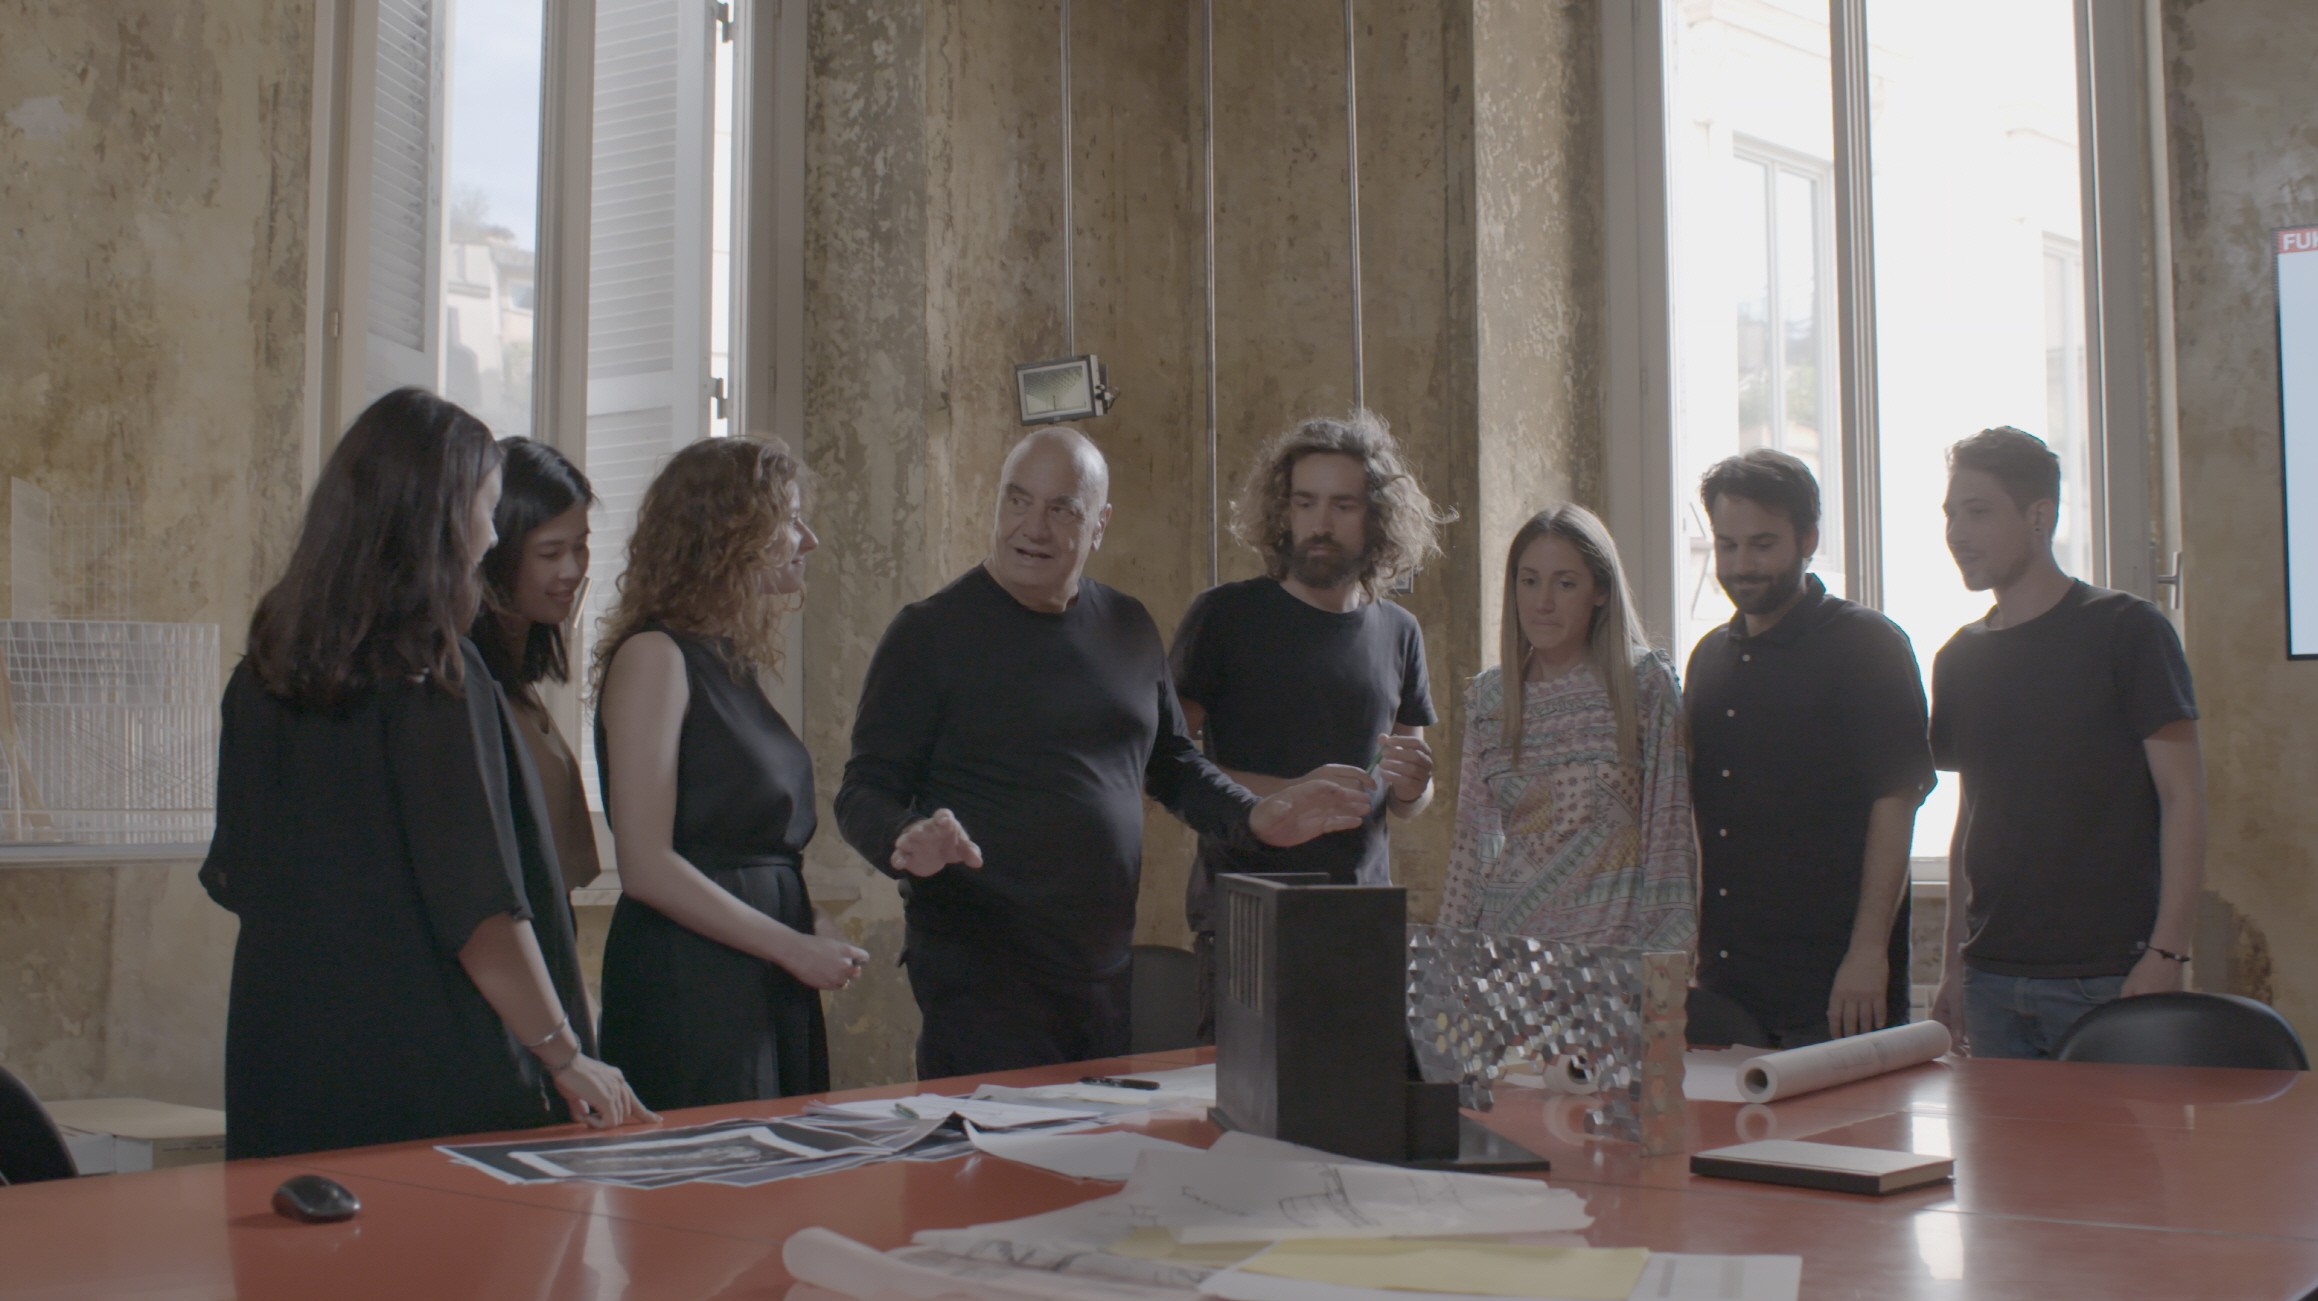 Massimiliano Fuksas and his team discuss the project.